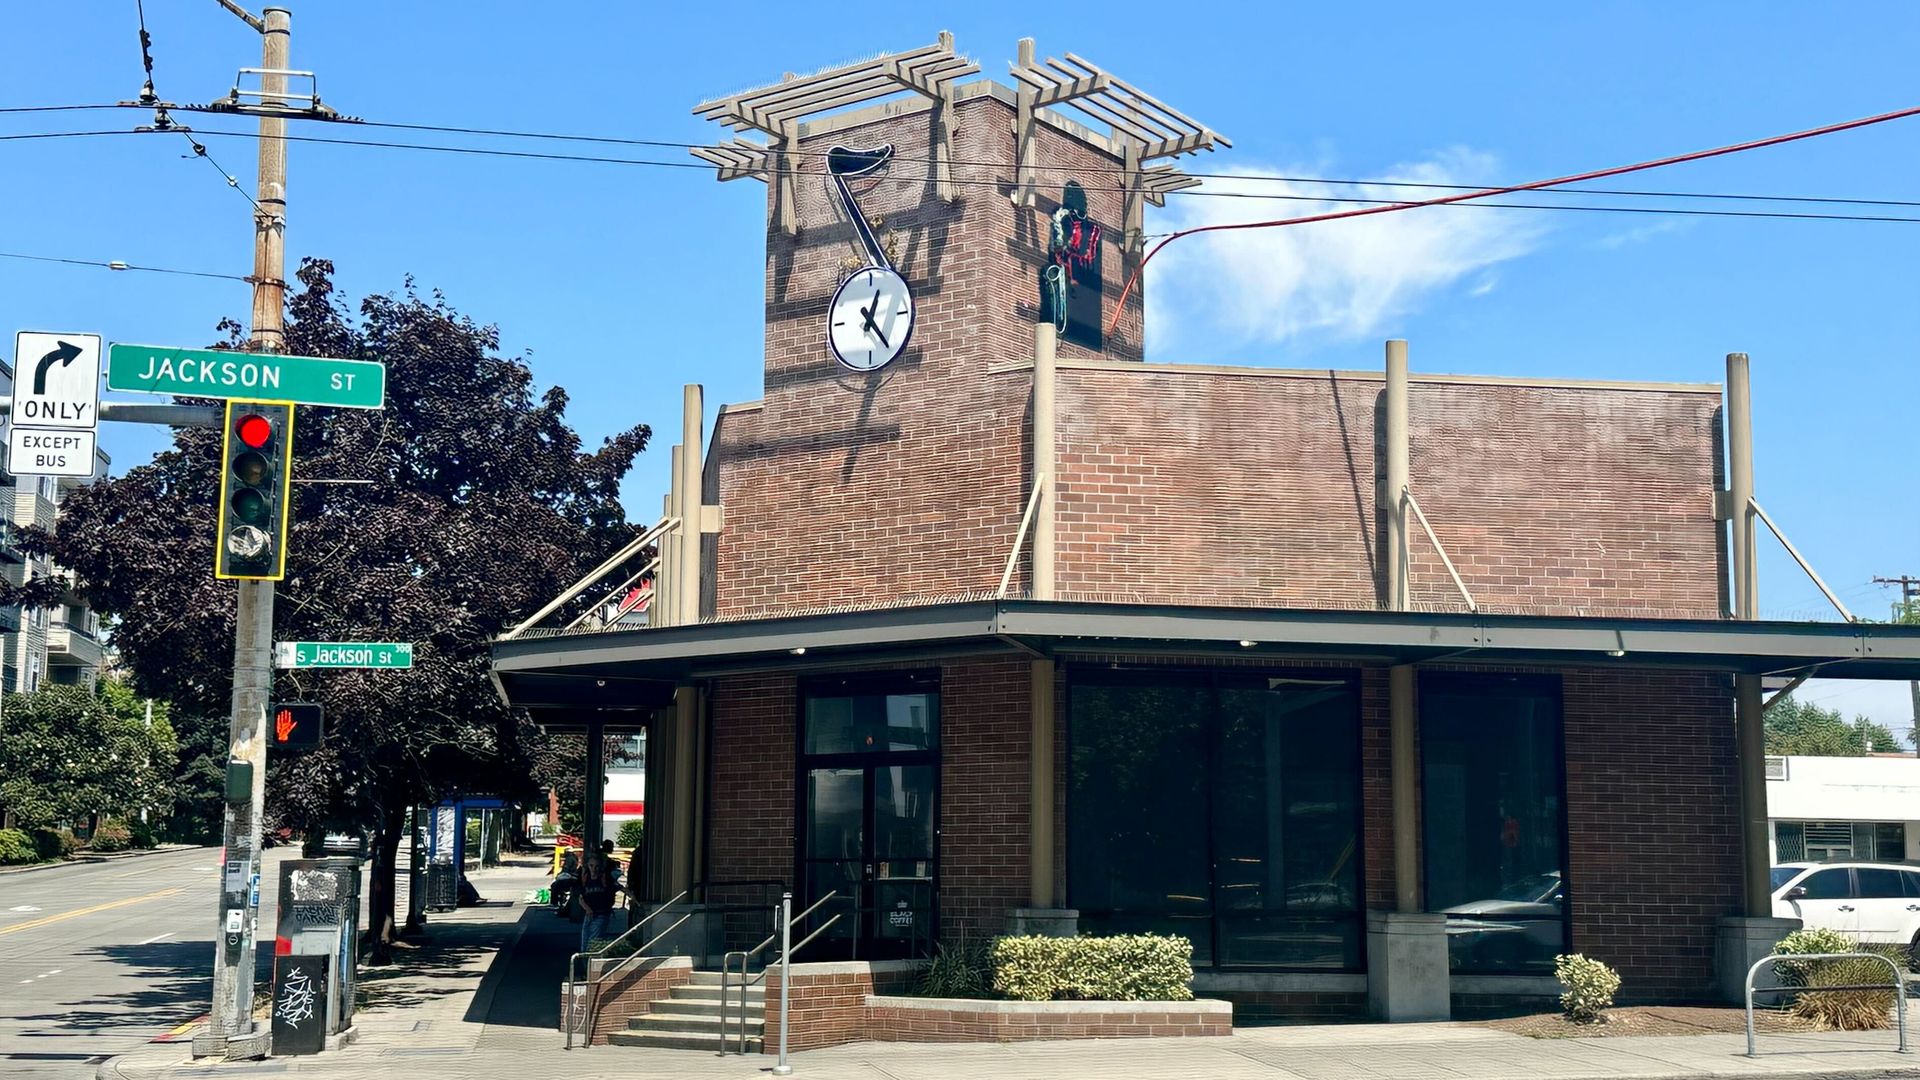 Photo of the old Starbucks at the corner of 23rd and Jackson in Seattle.